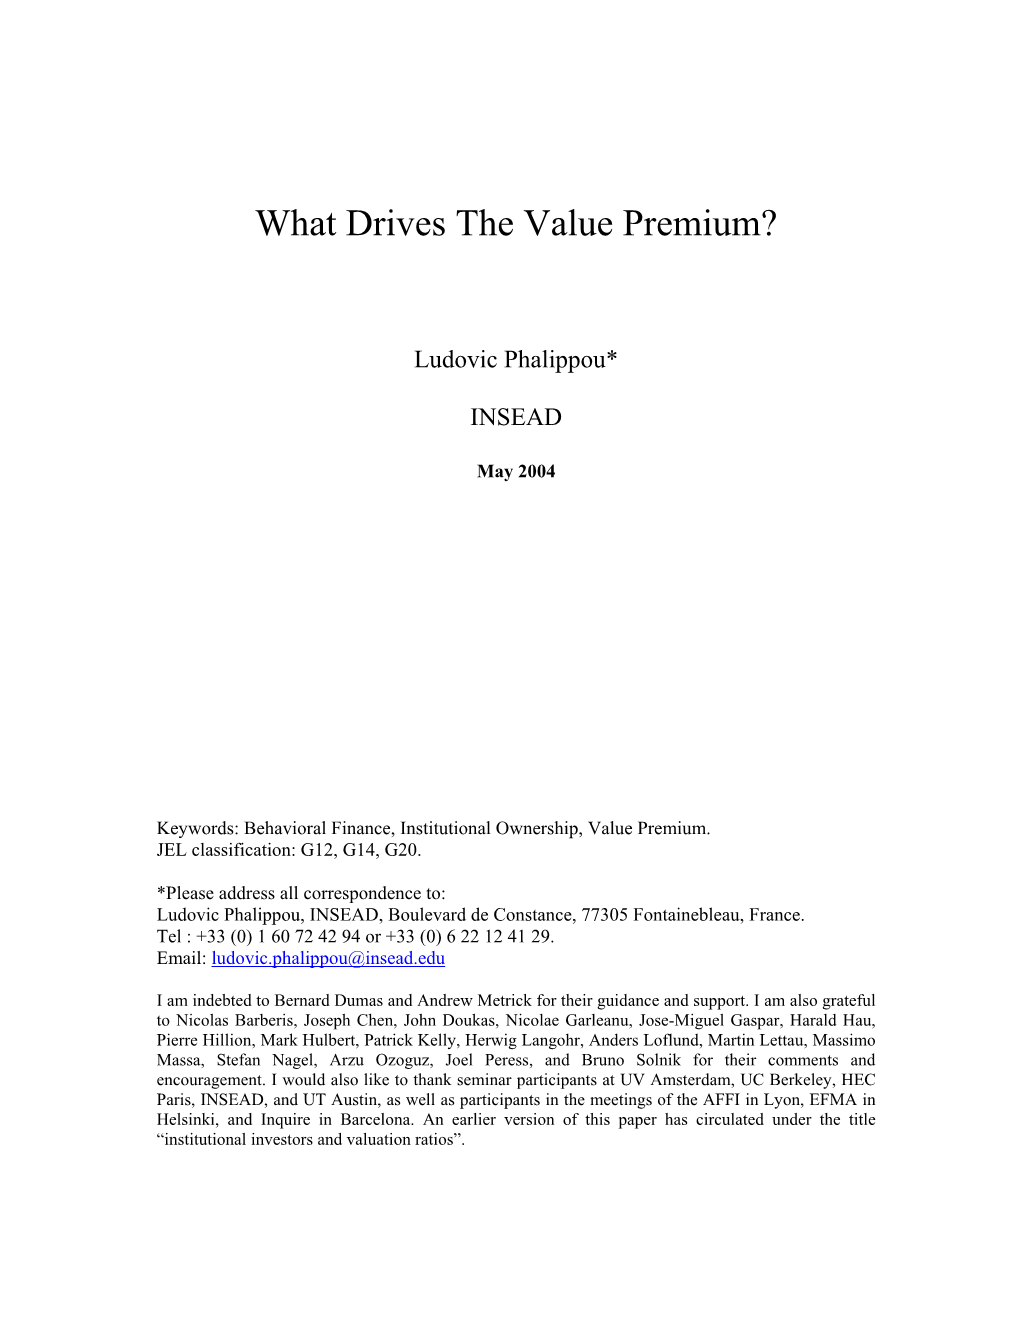 What Drives the Value Premium?